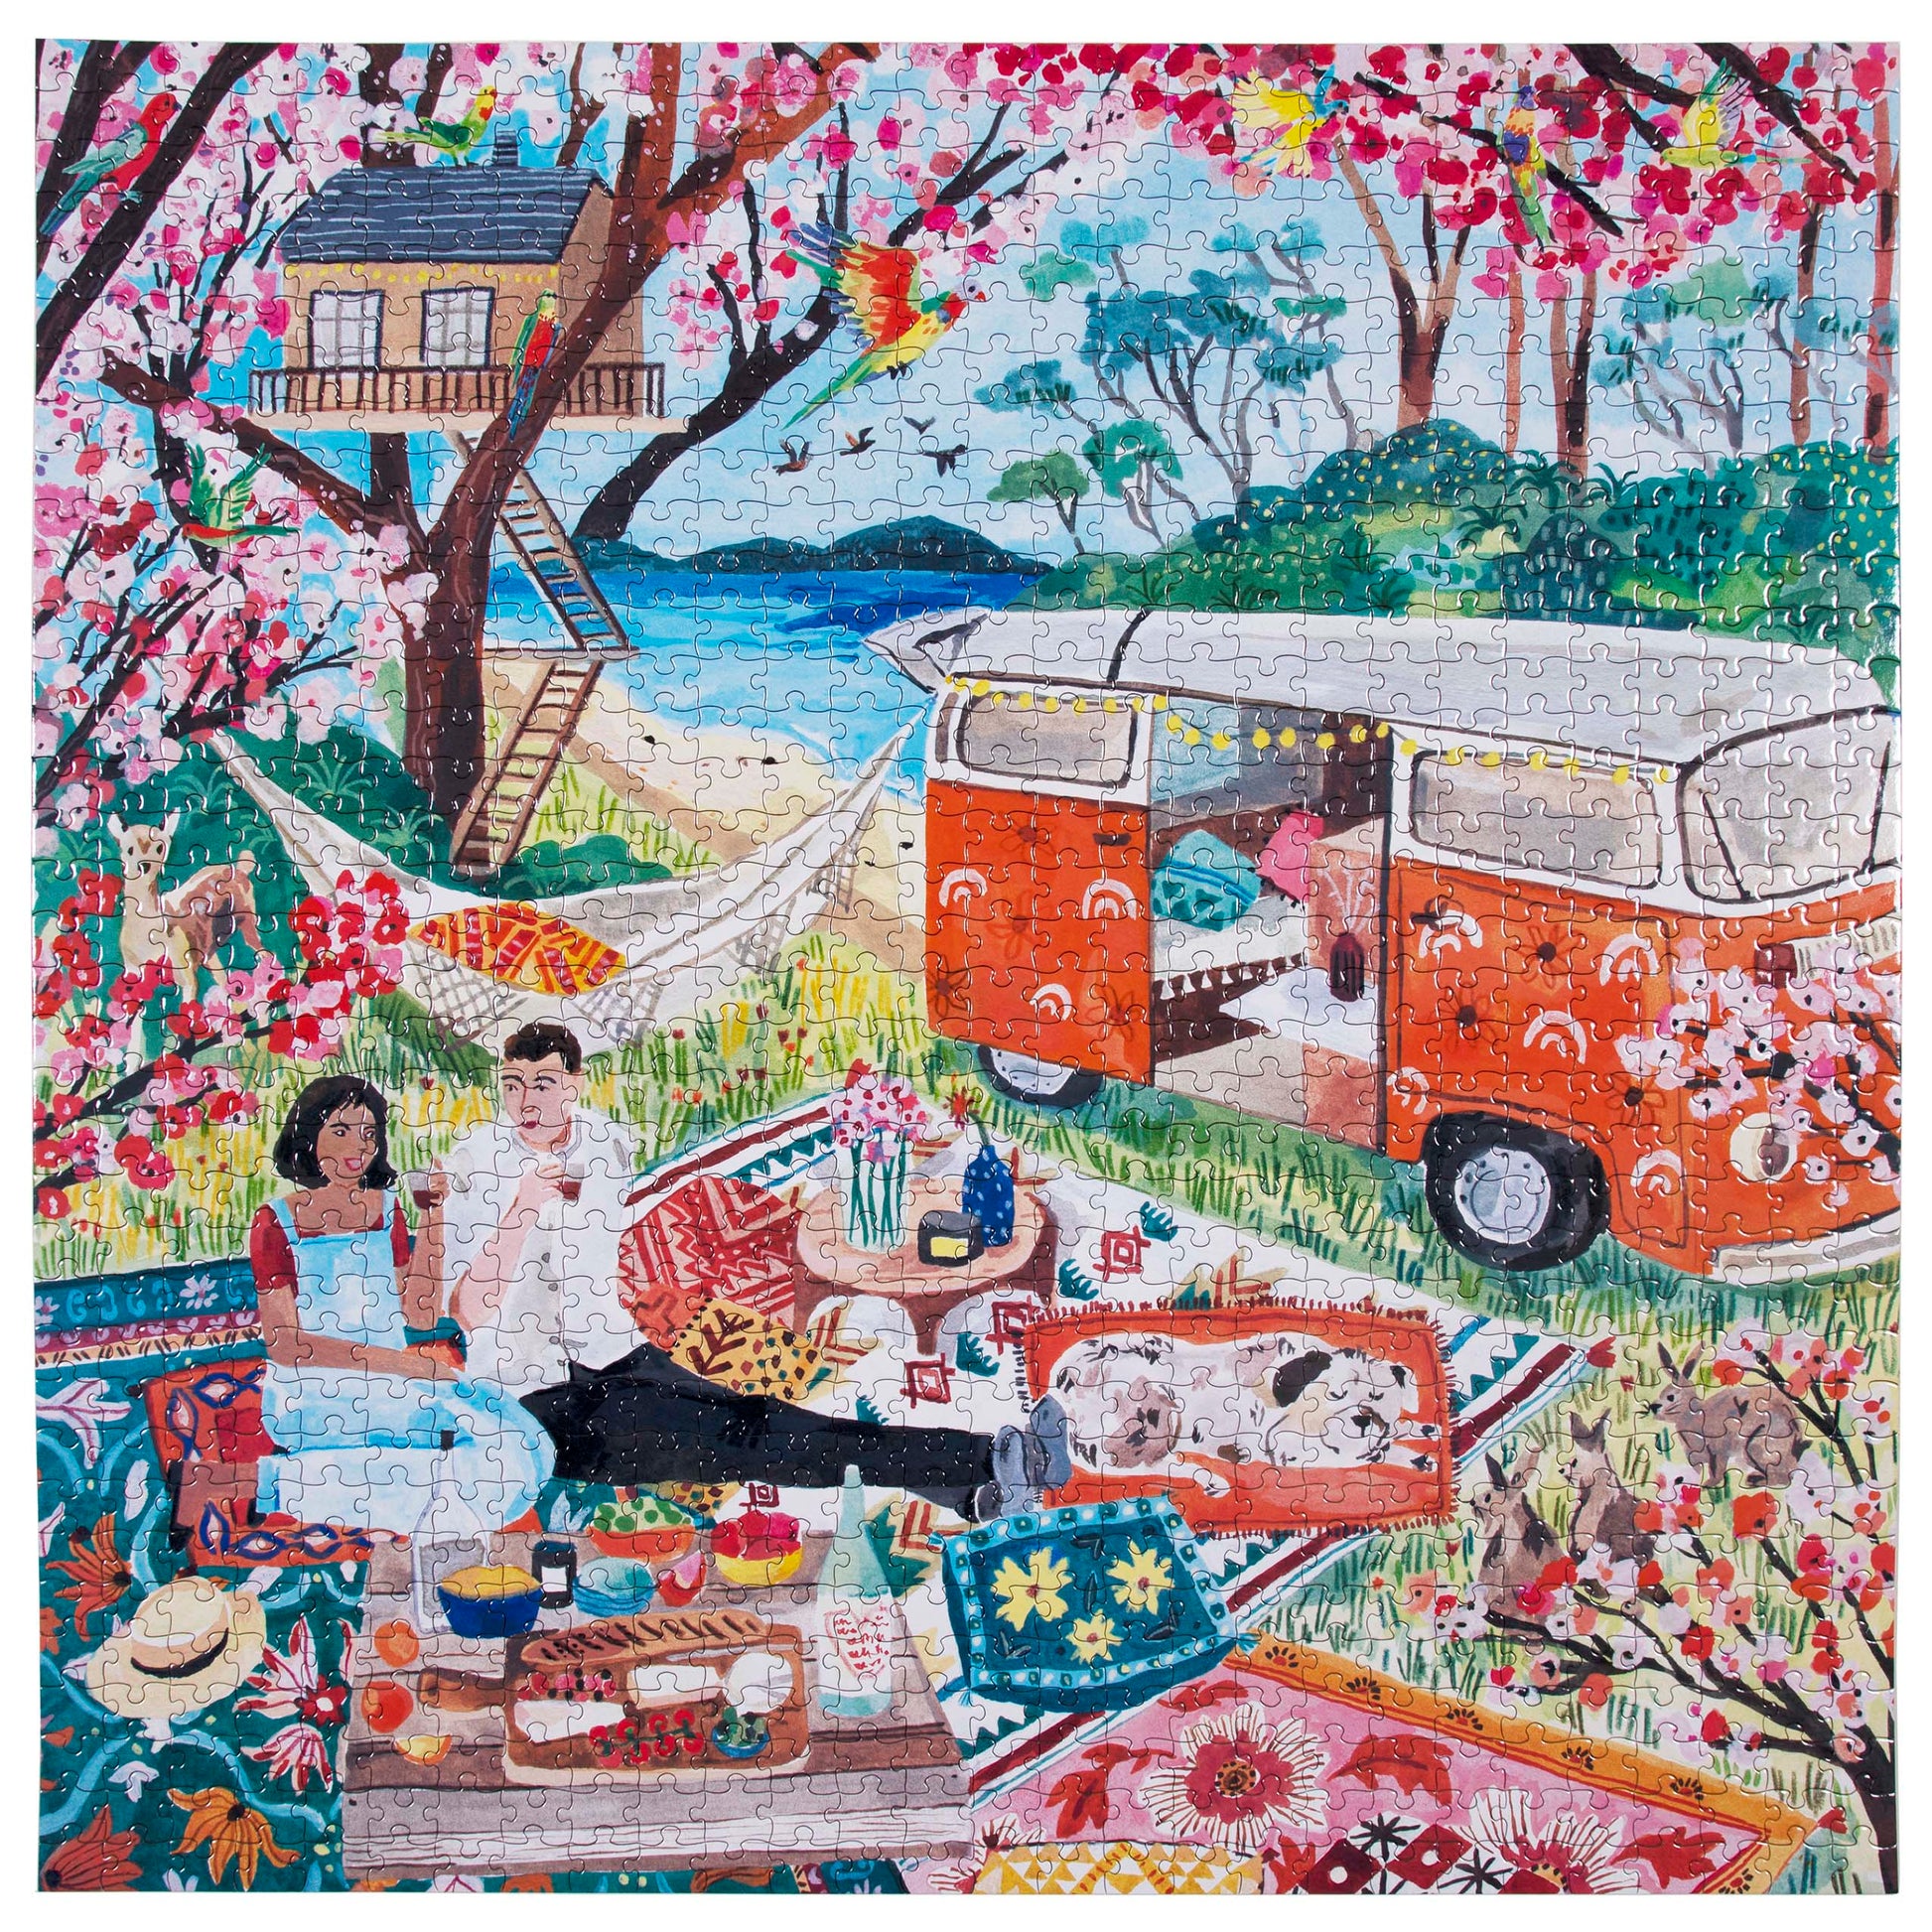 Camper Life 1000 Piece Jigsaw Puzzle Travel Nomad | eeBoo Piece & Love | Gifts for Van Life Travelers 